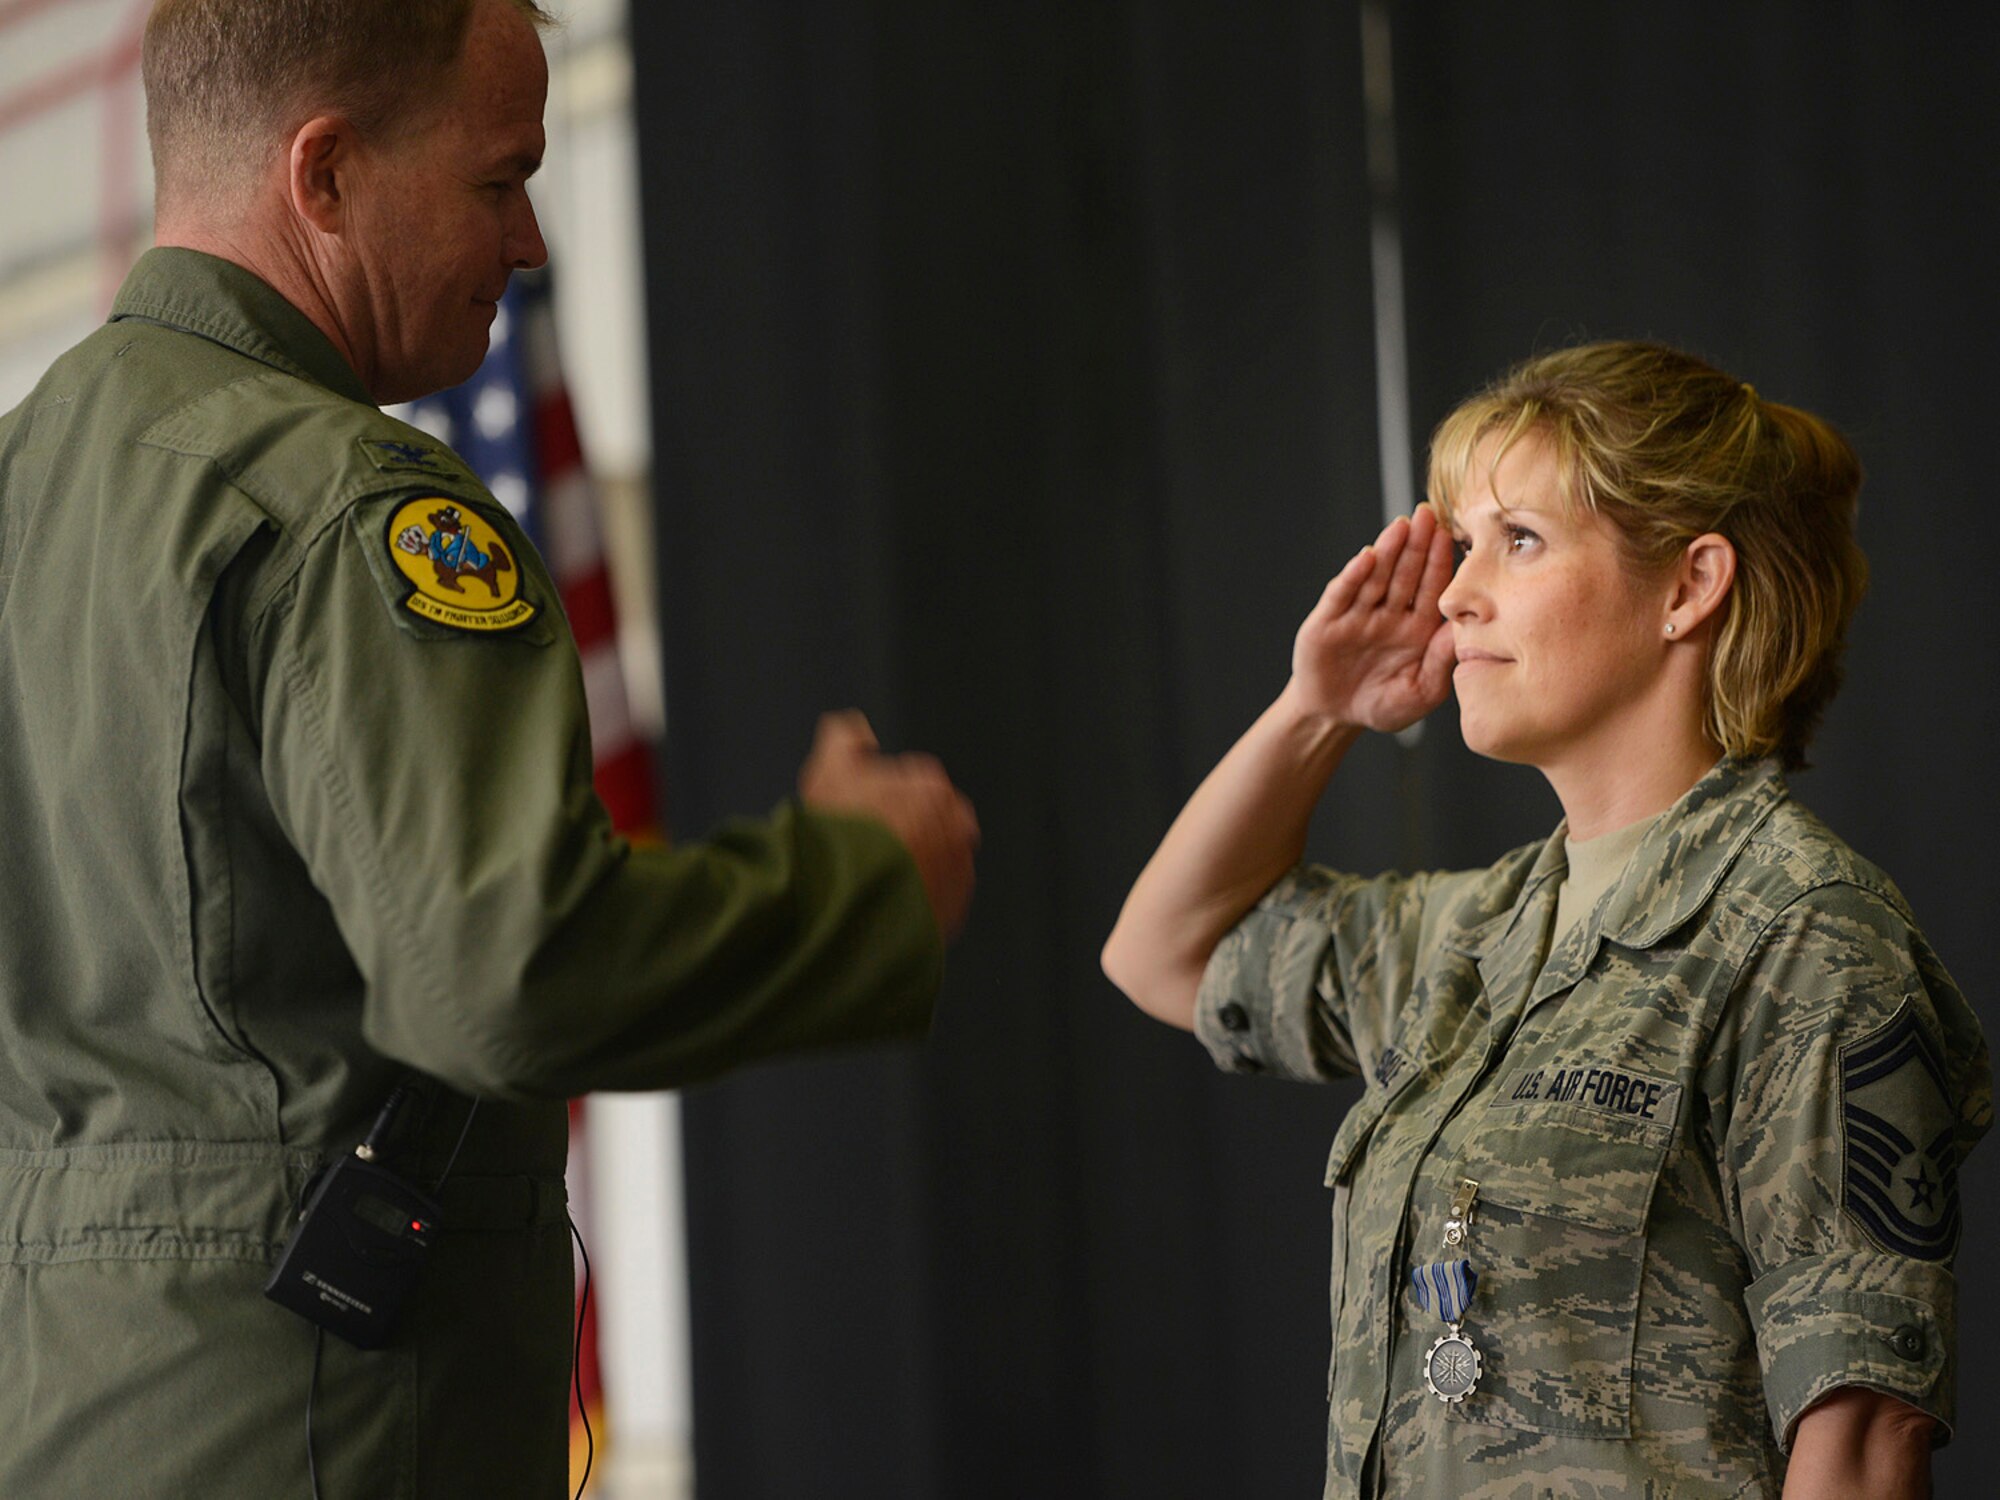 Colonel David B. Burgy, 138th Fighter Wing Commander, presents the U.S. Air Force Achievement Medal to Senior Master Sergeant Amanda Lonsdale for her outstanding work as a Family Assistance Officer.  The medal was presented during a Commanders Call at the Tulsa Air National Guard base, June 8, 2014.    (U.S. National Guard photo by Master Sgt.  Mark A. Moore/Released)